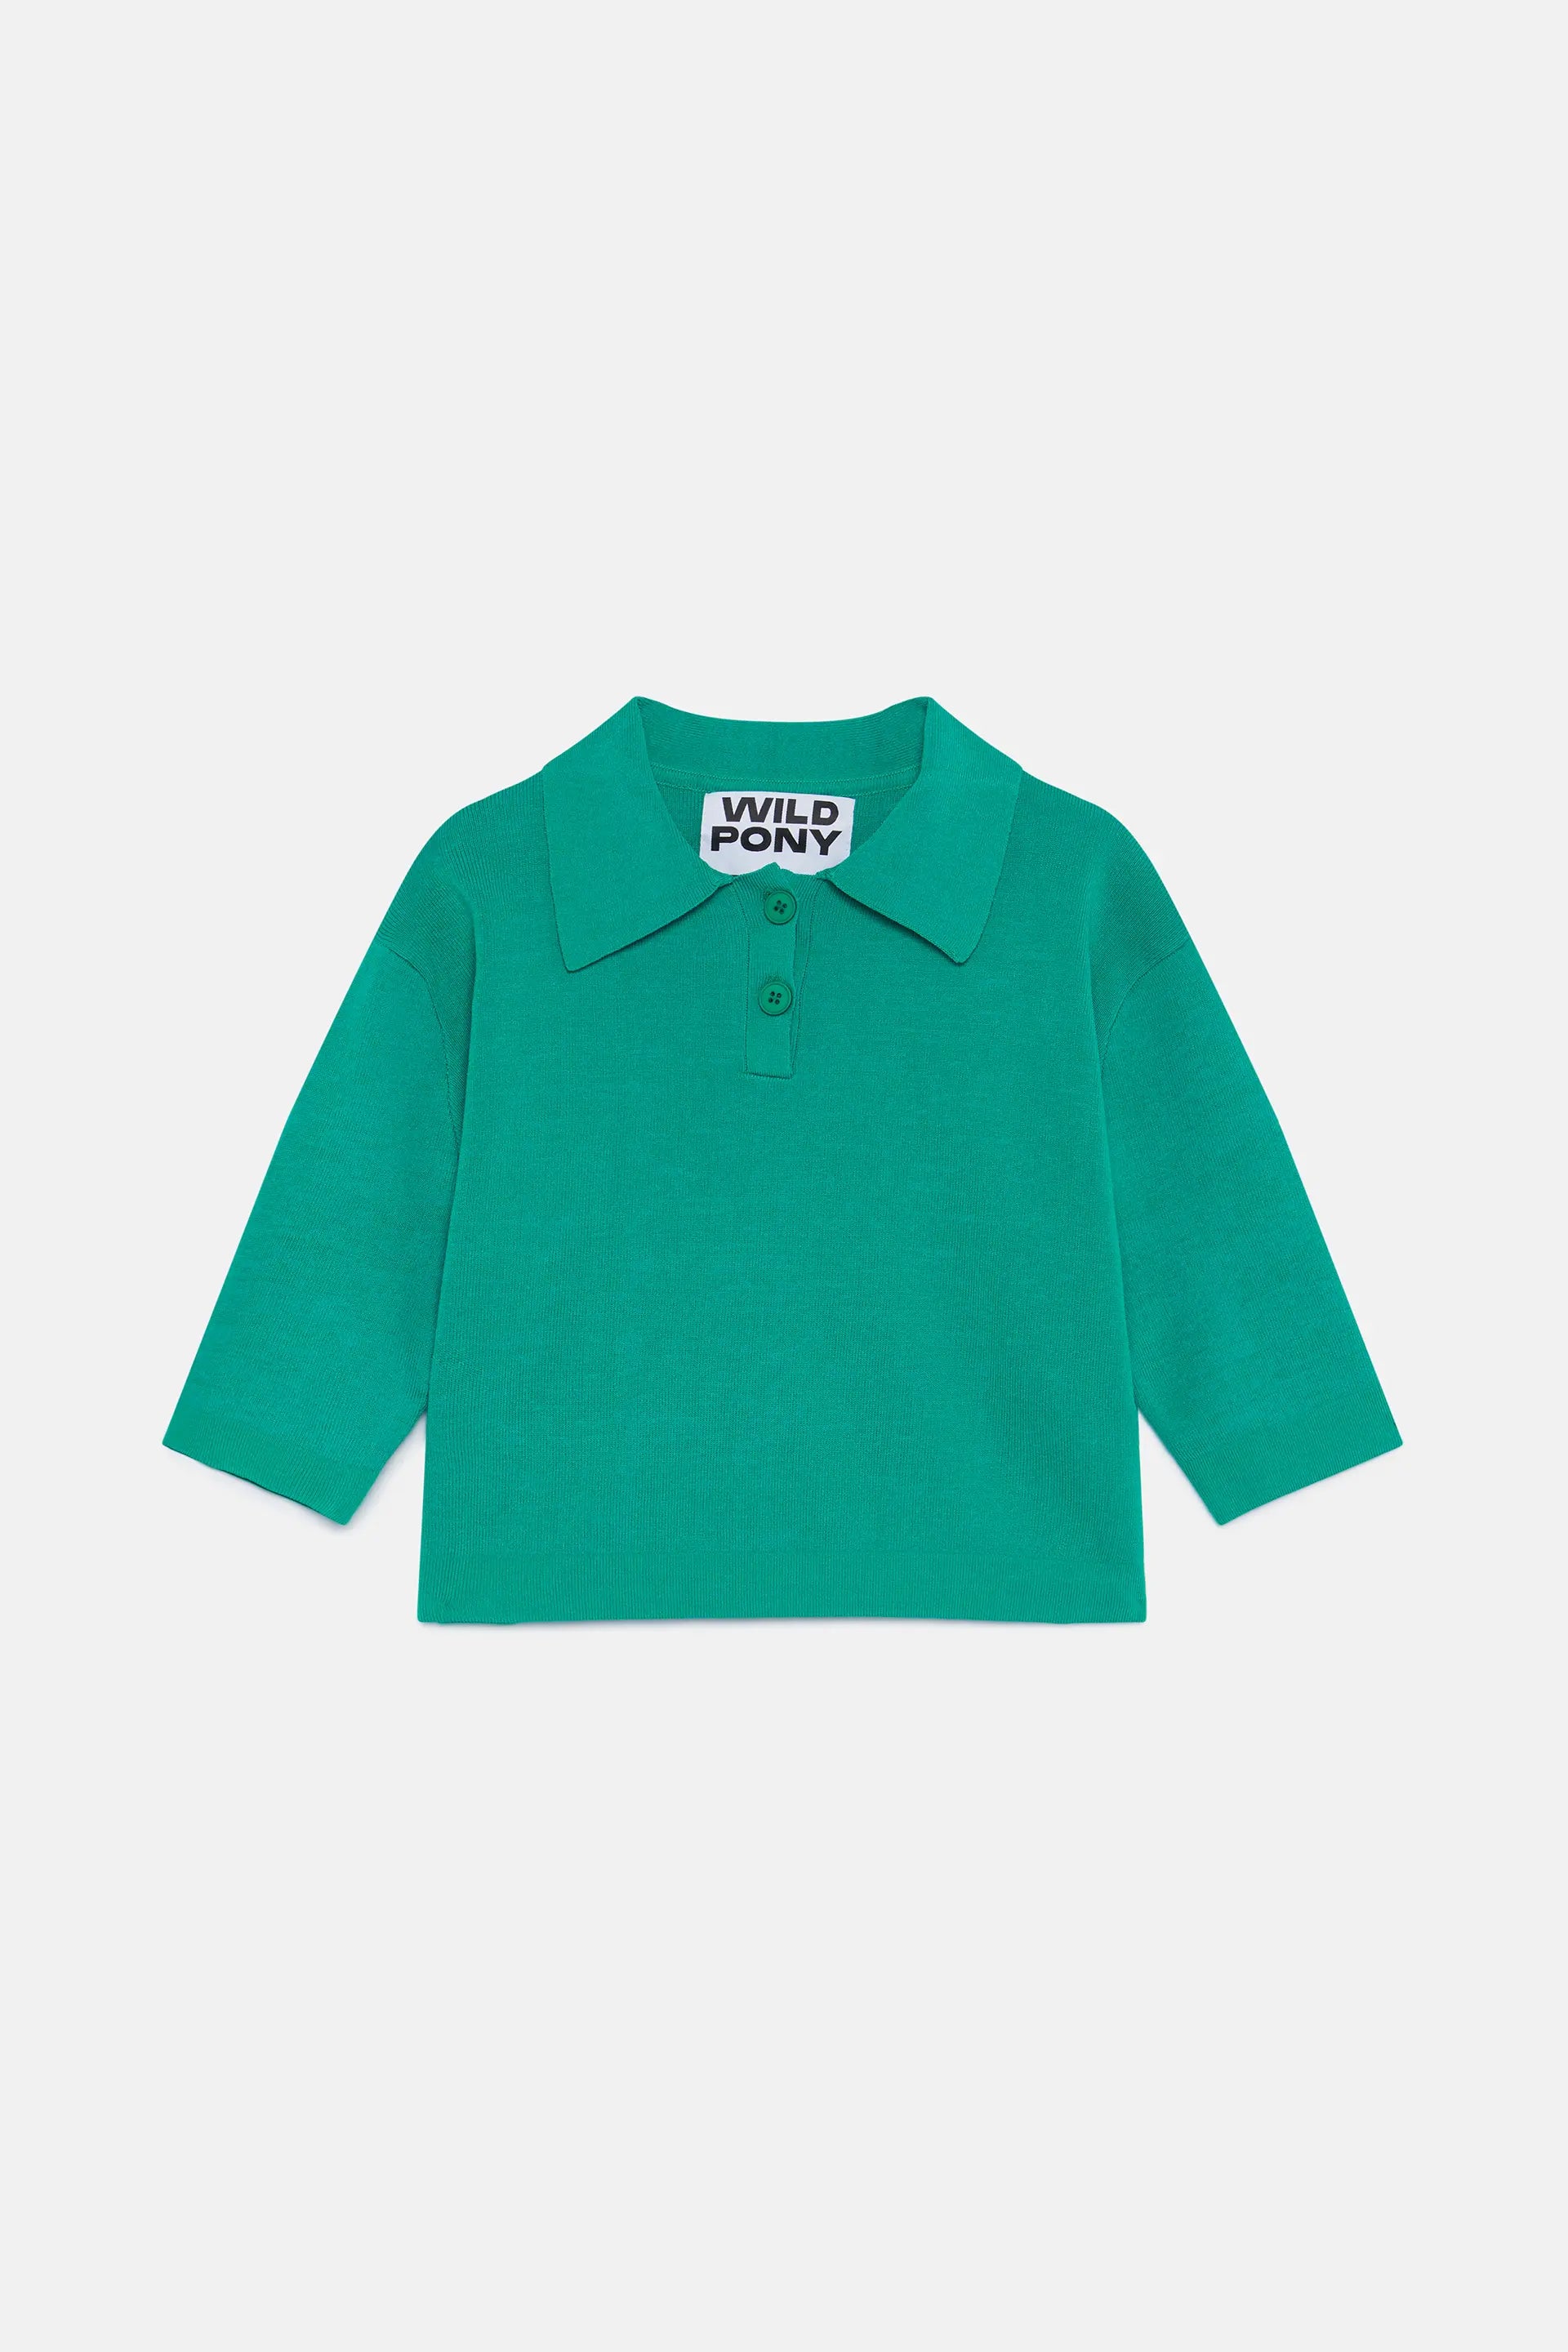 Wild Pony Green polo neck knitted sweater - clever alice